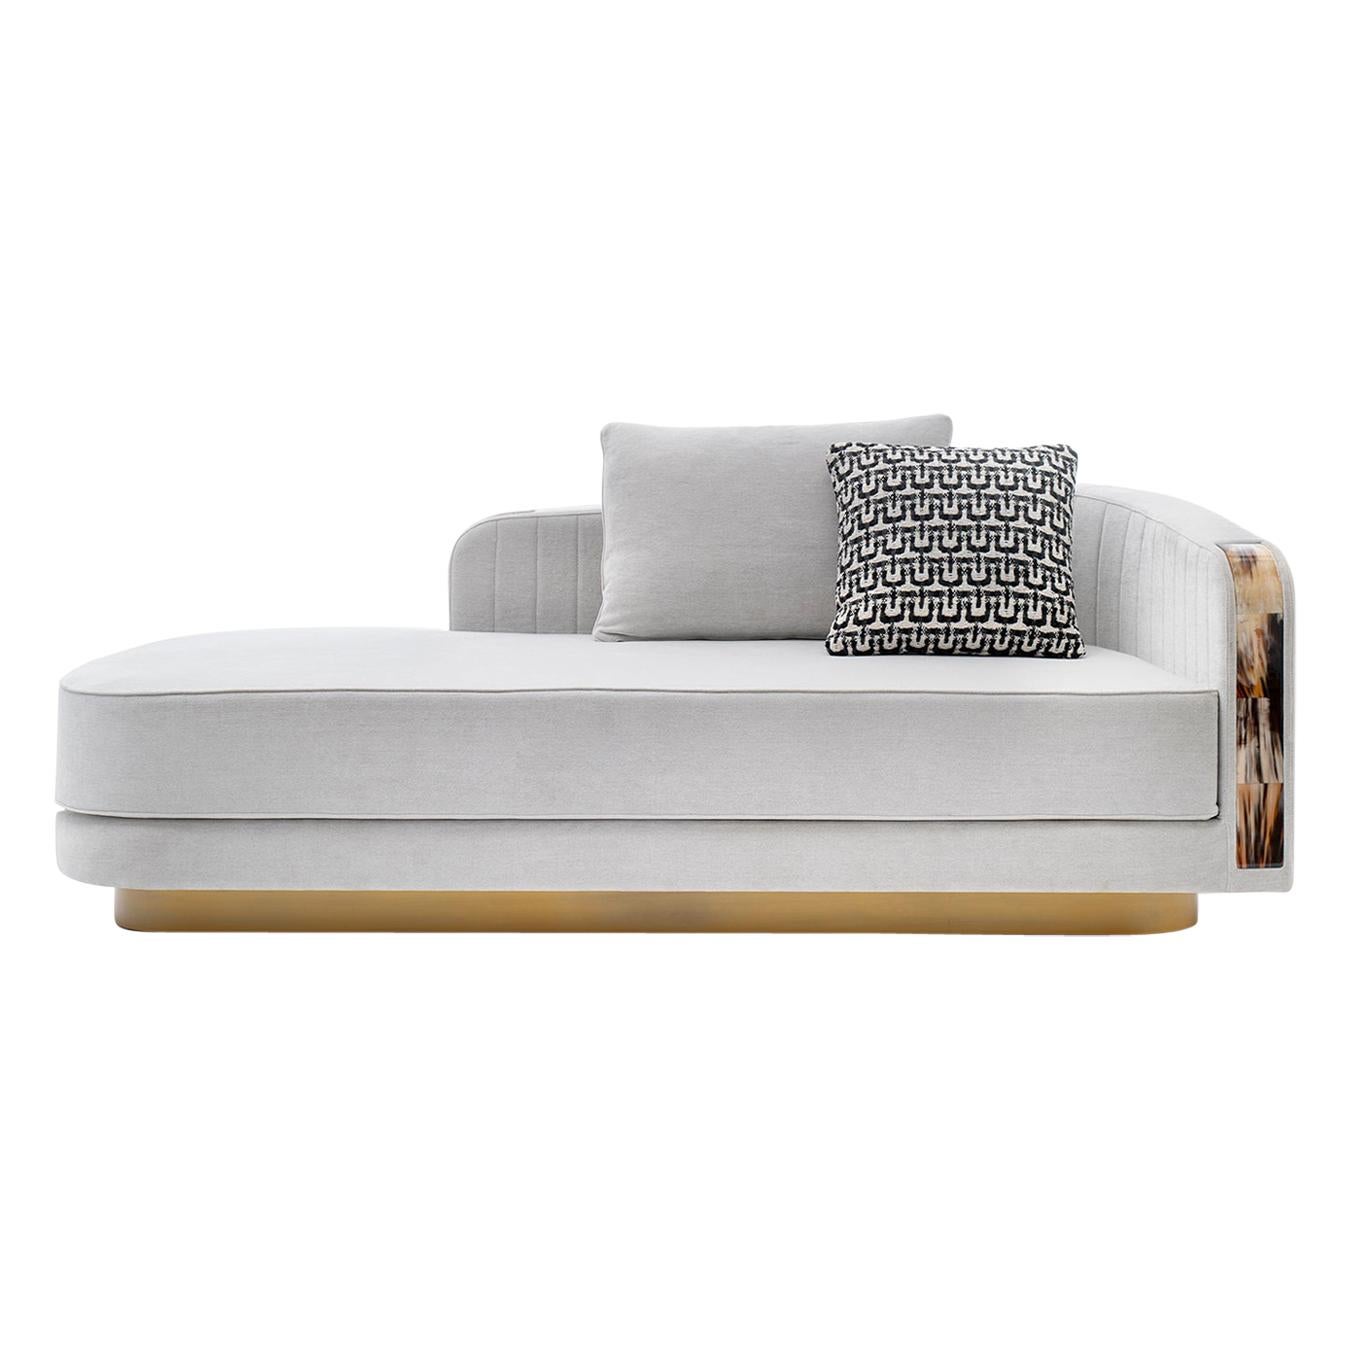 Afrodite Chaise Longue with Armrests in Corno Italiano, Mod. 7043DXB